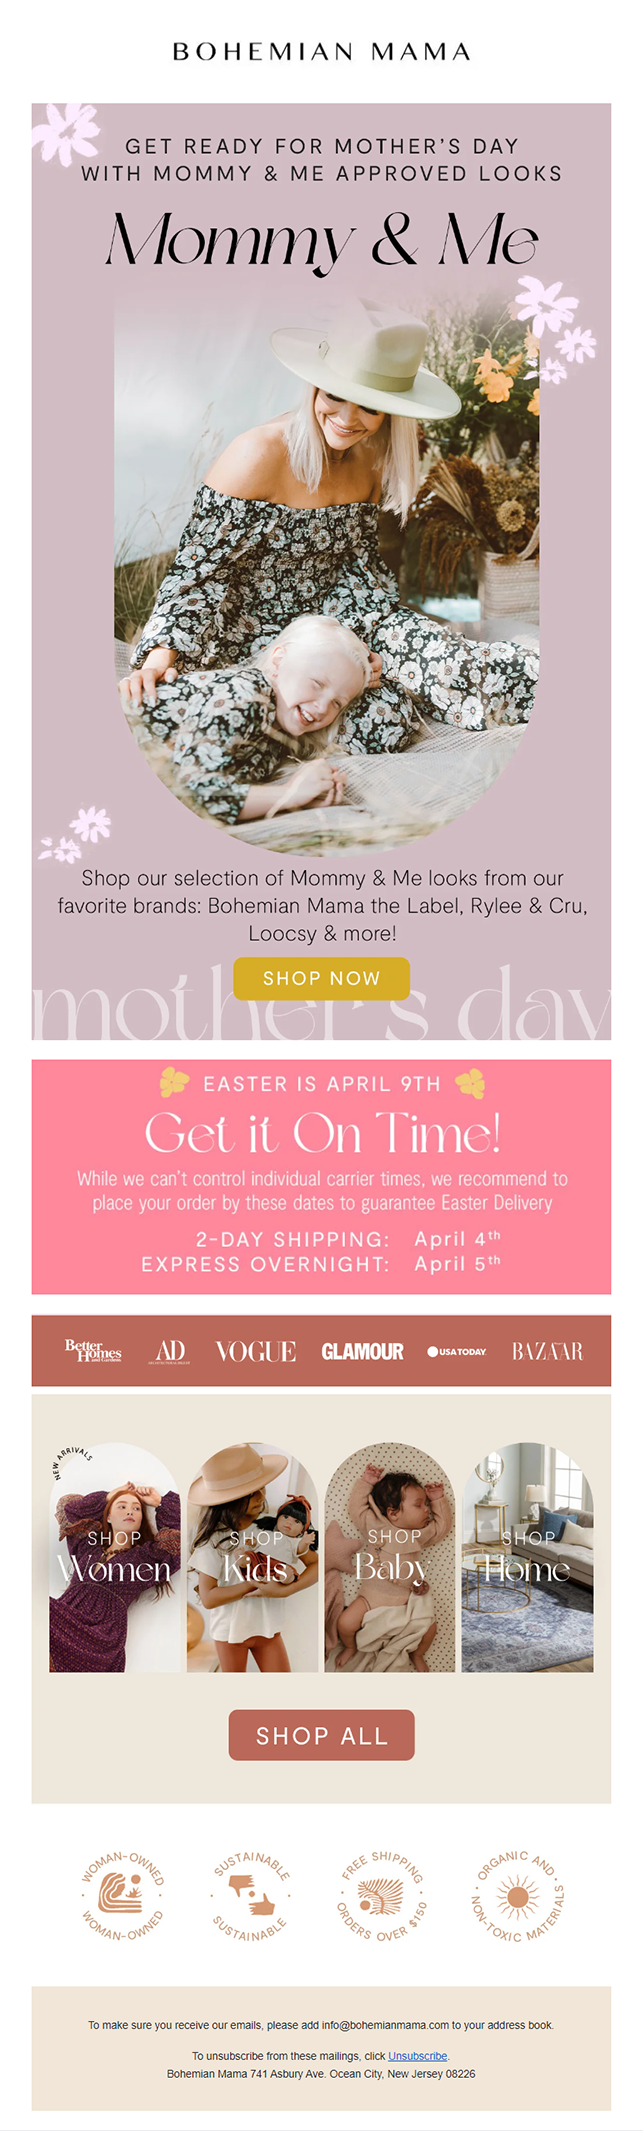 Bohemian-Mama- Mother's day email